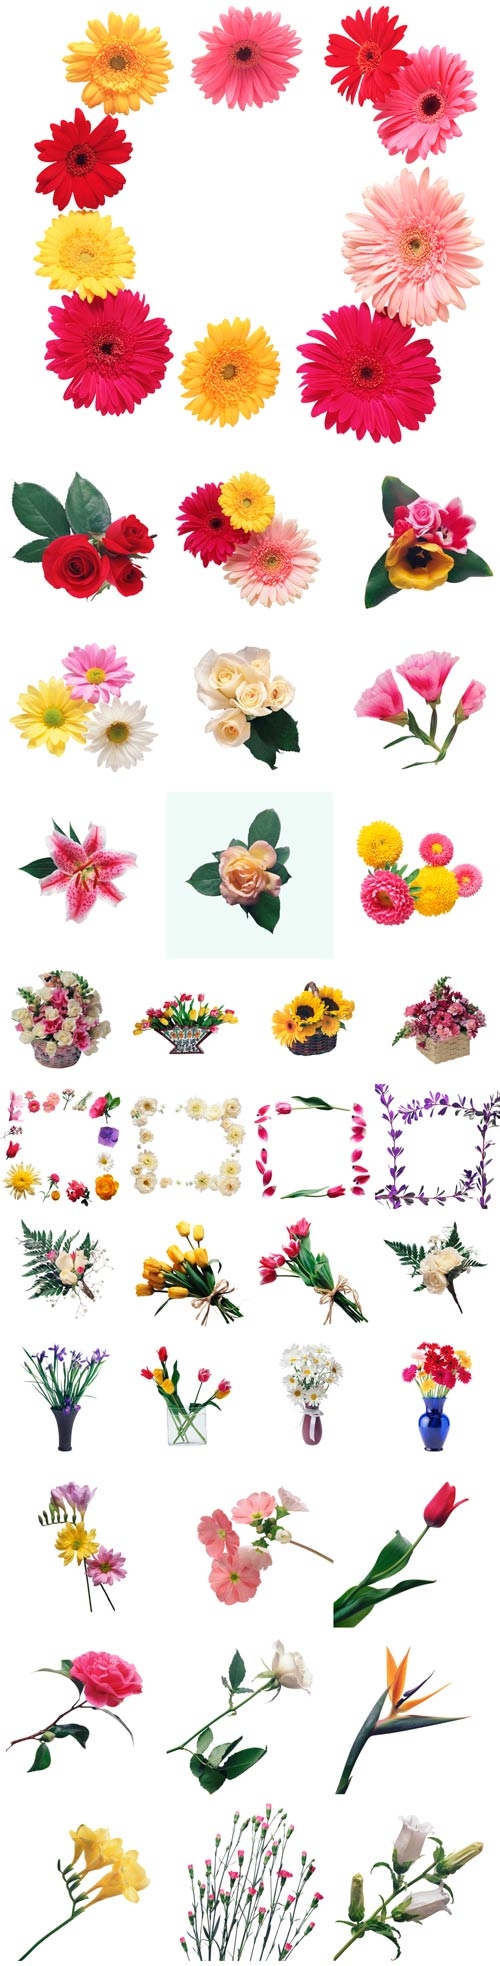 Different flowers on a white background